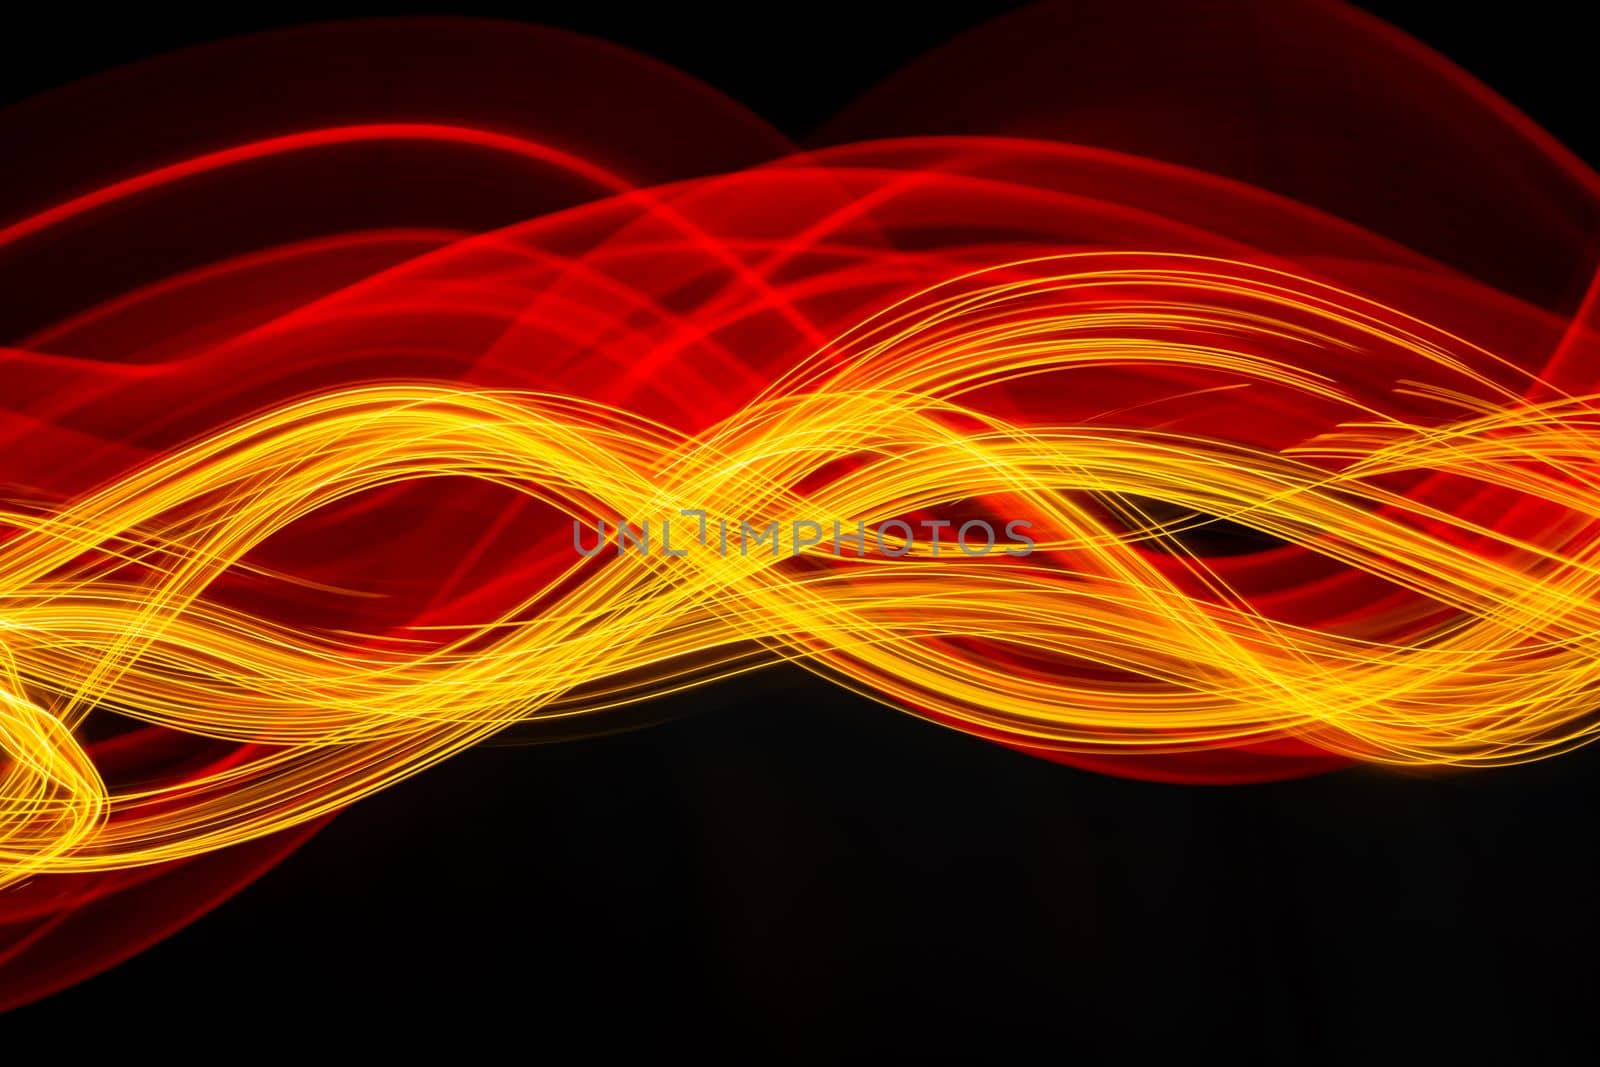 Abstract modern technology banner design. Digital neon fractal lines on black background. Light painting with long exposure. High quality photo